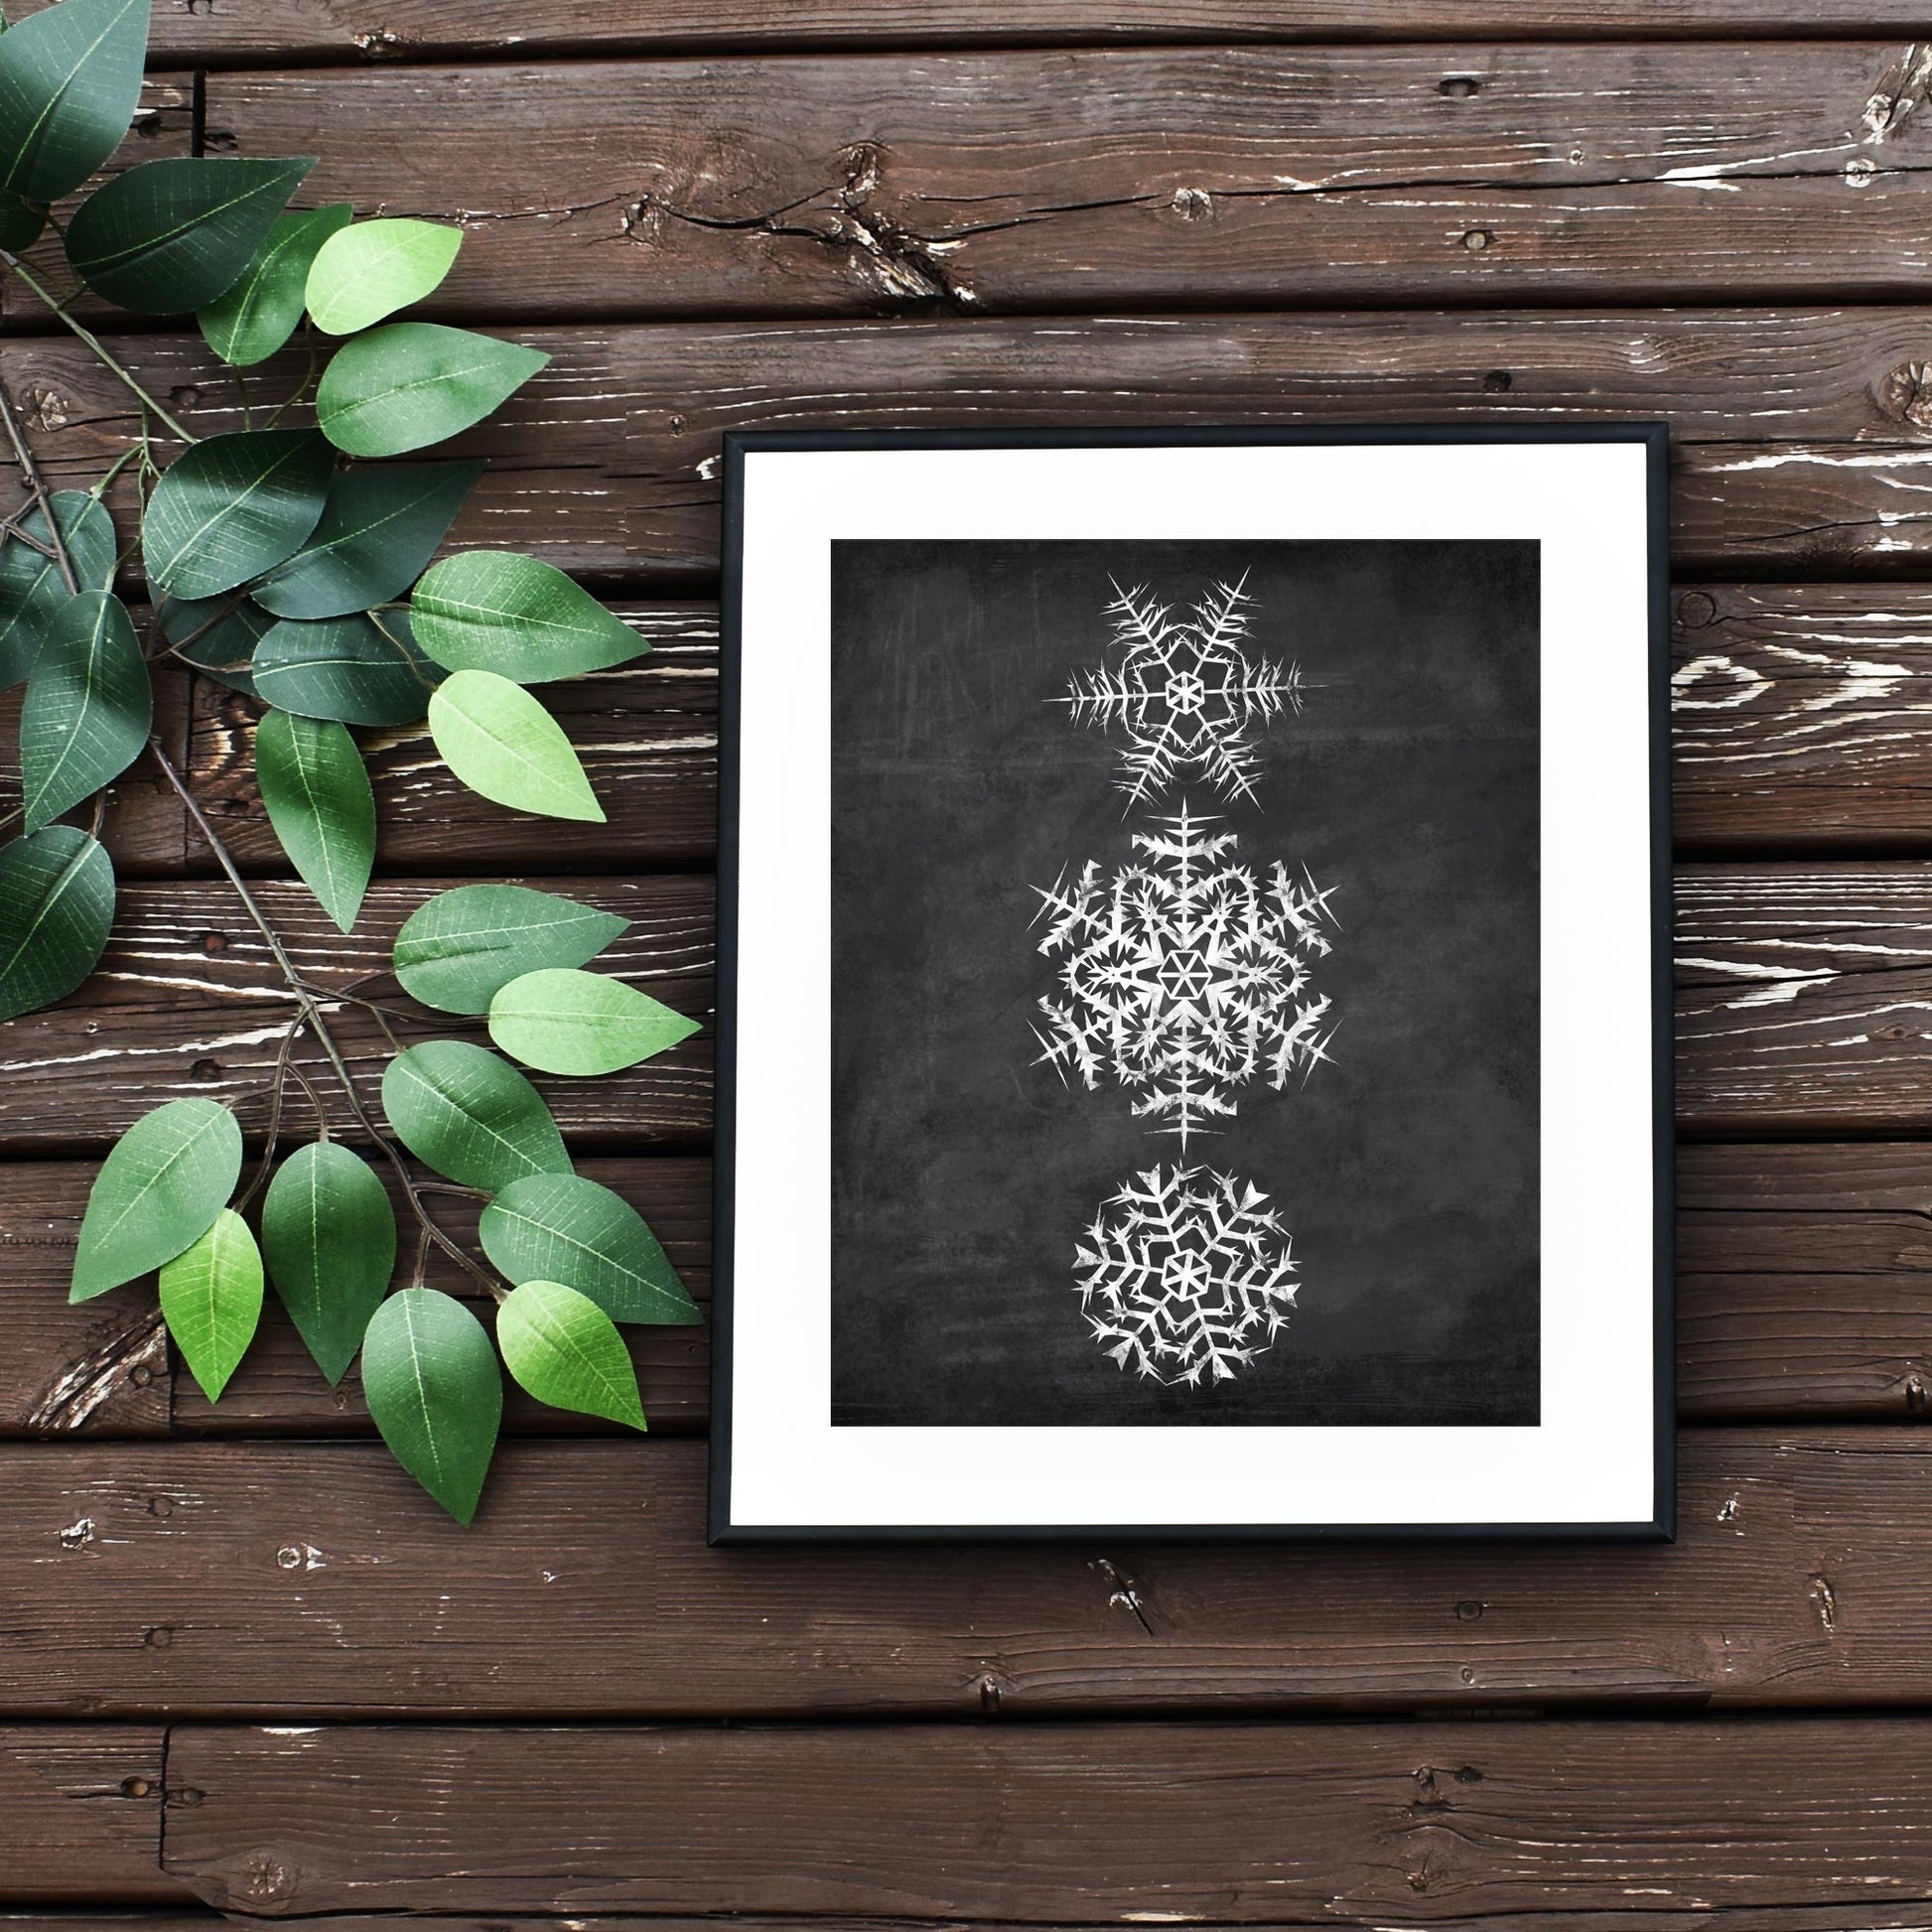 Easy Printable Snowflakes Chalkboard Budget Friendly Christmas decor for Winter